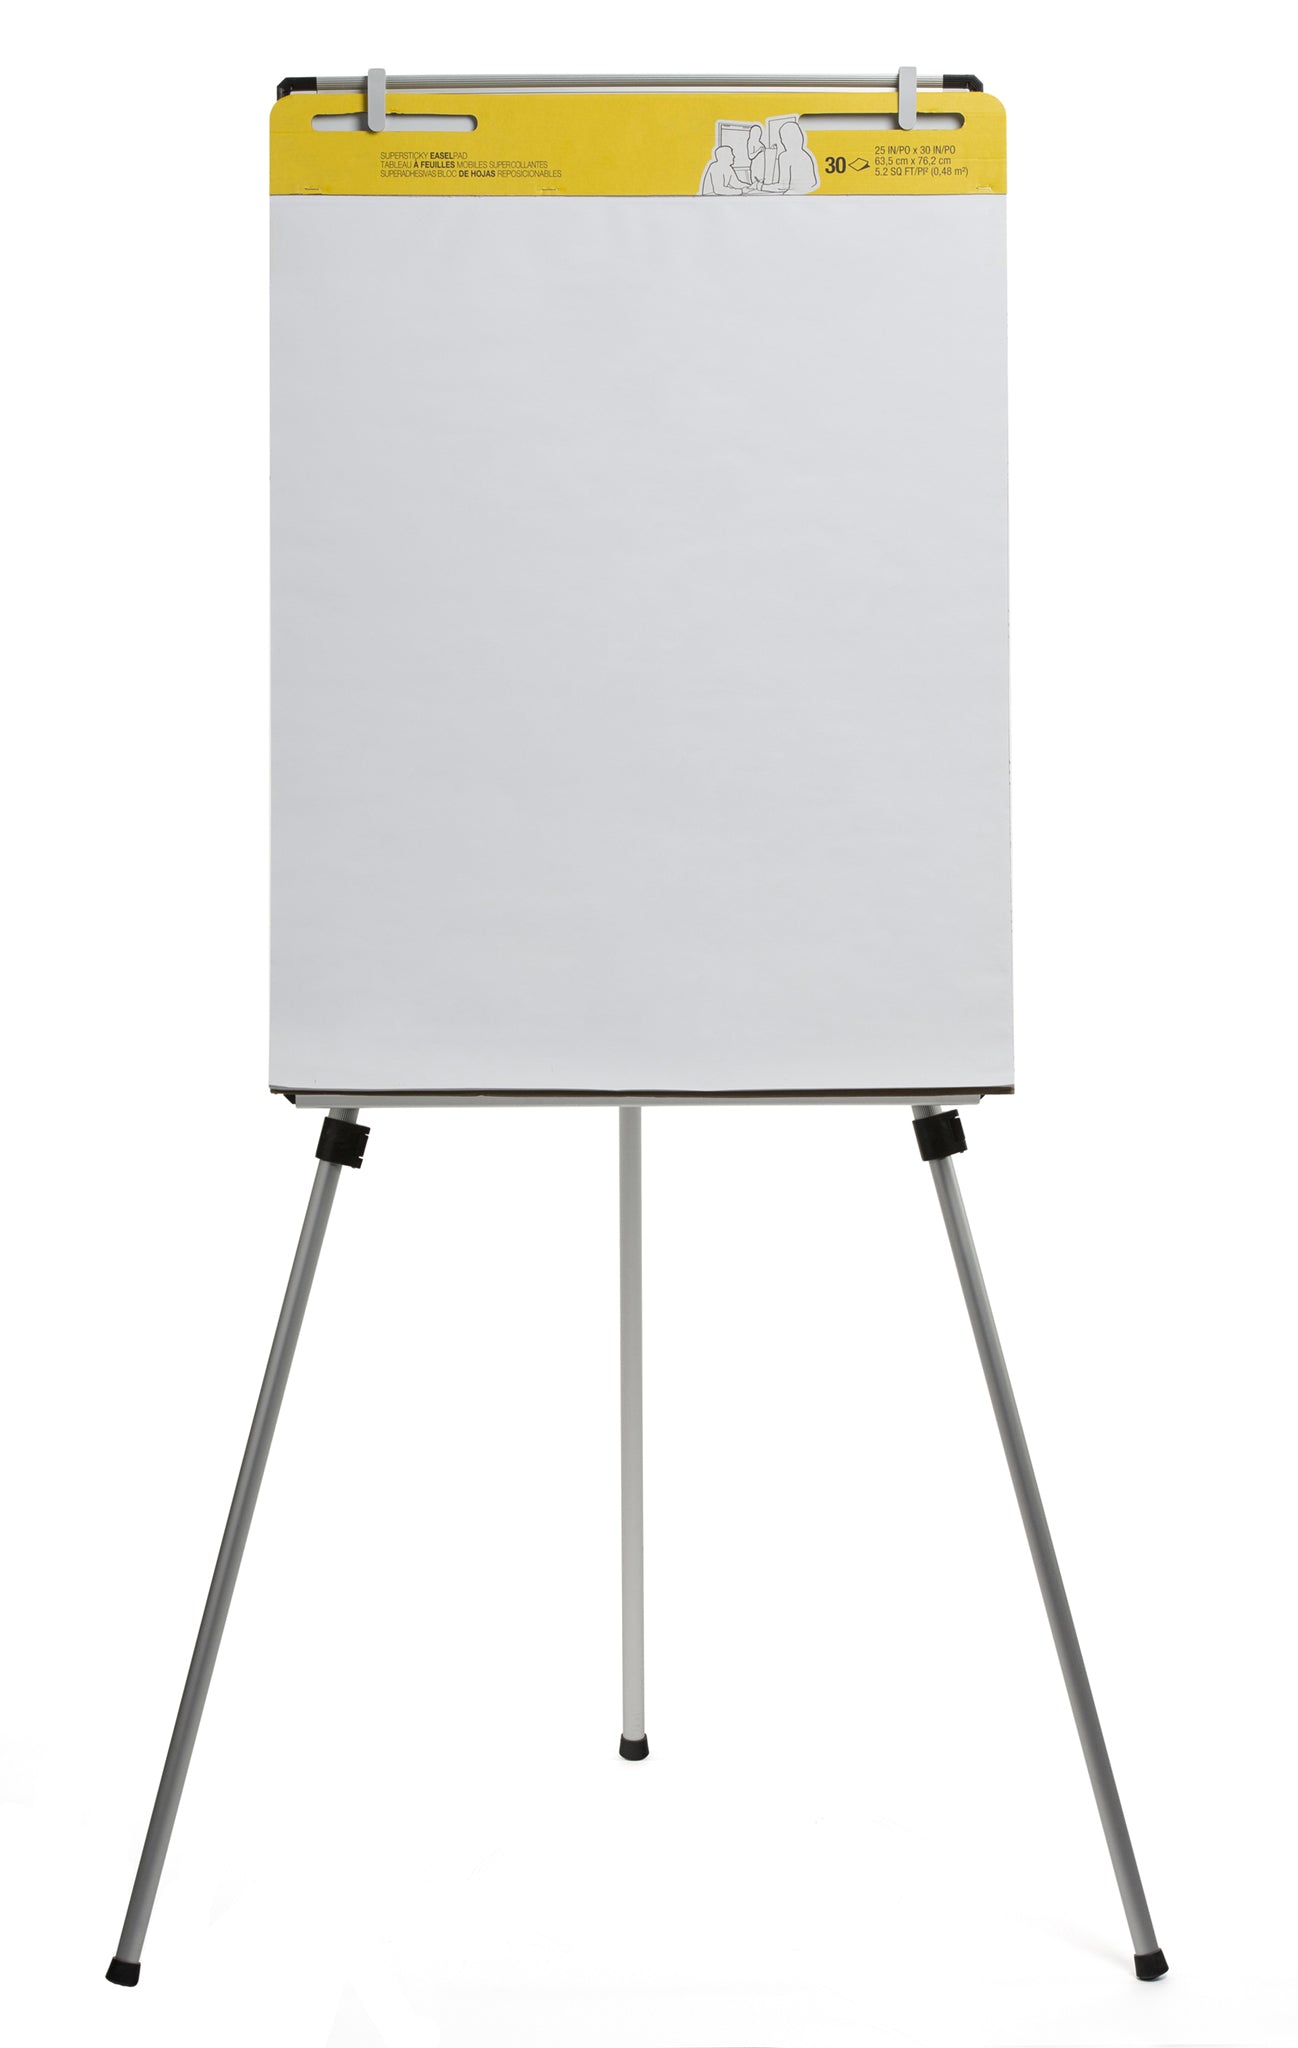 Free Standing White board. Holding a 3m easel pad with the included 2 pad holders. 